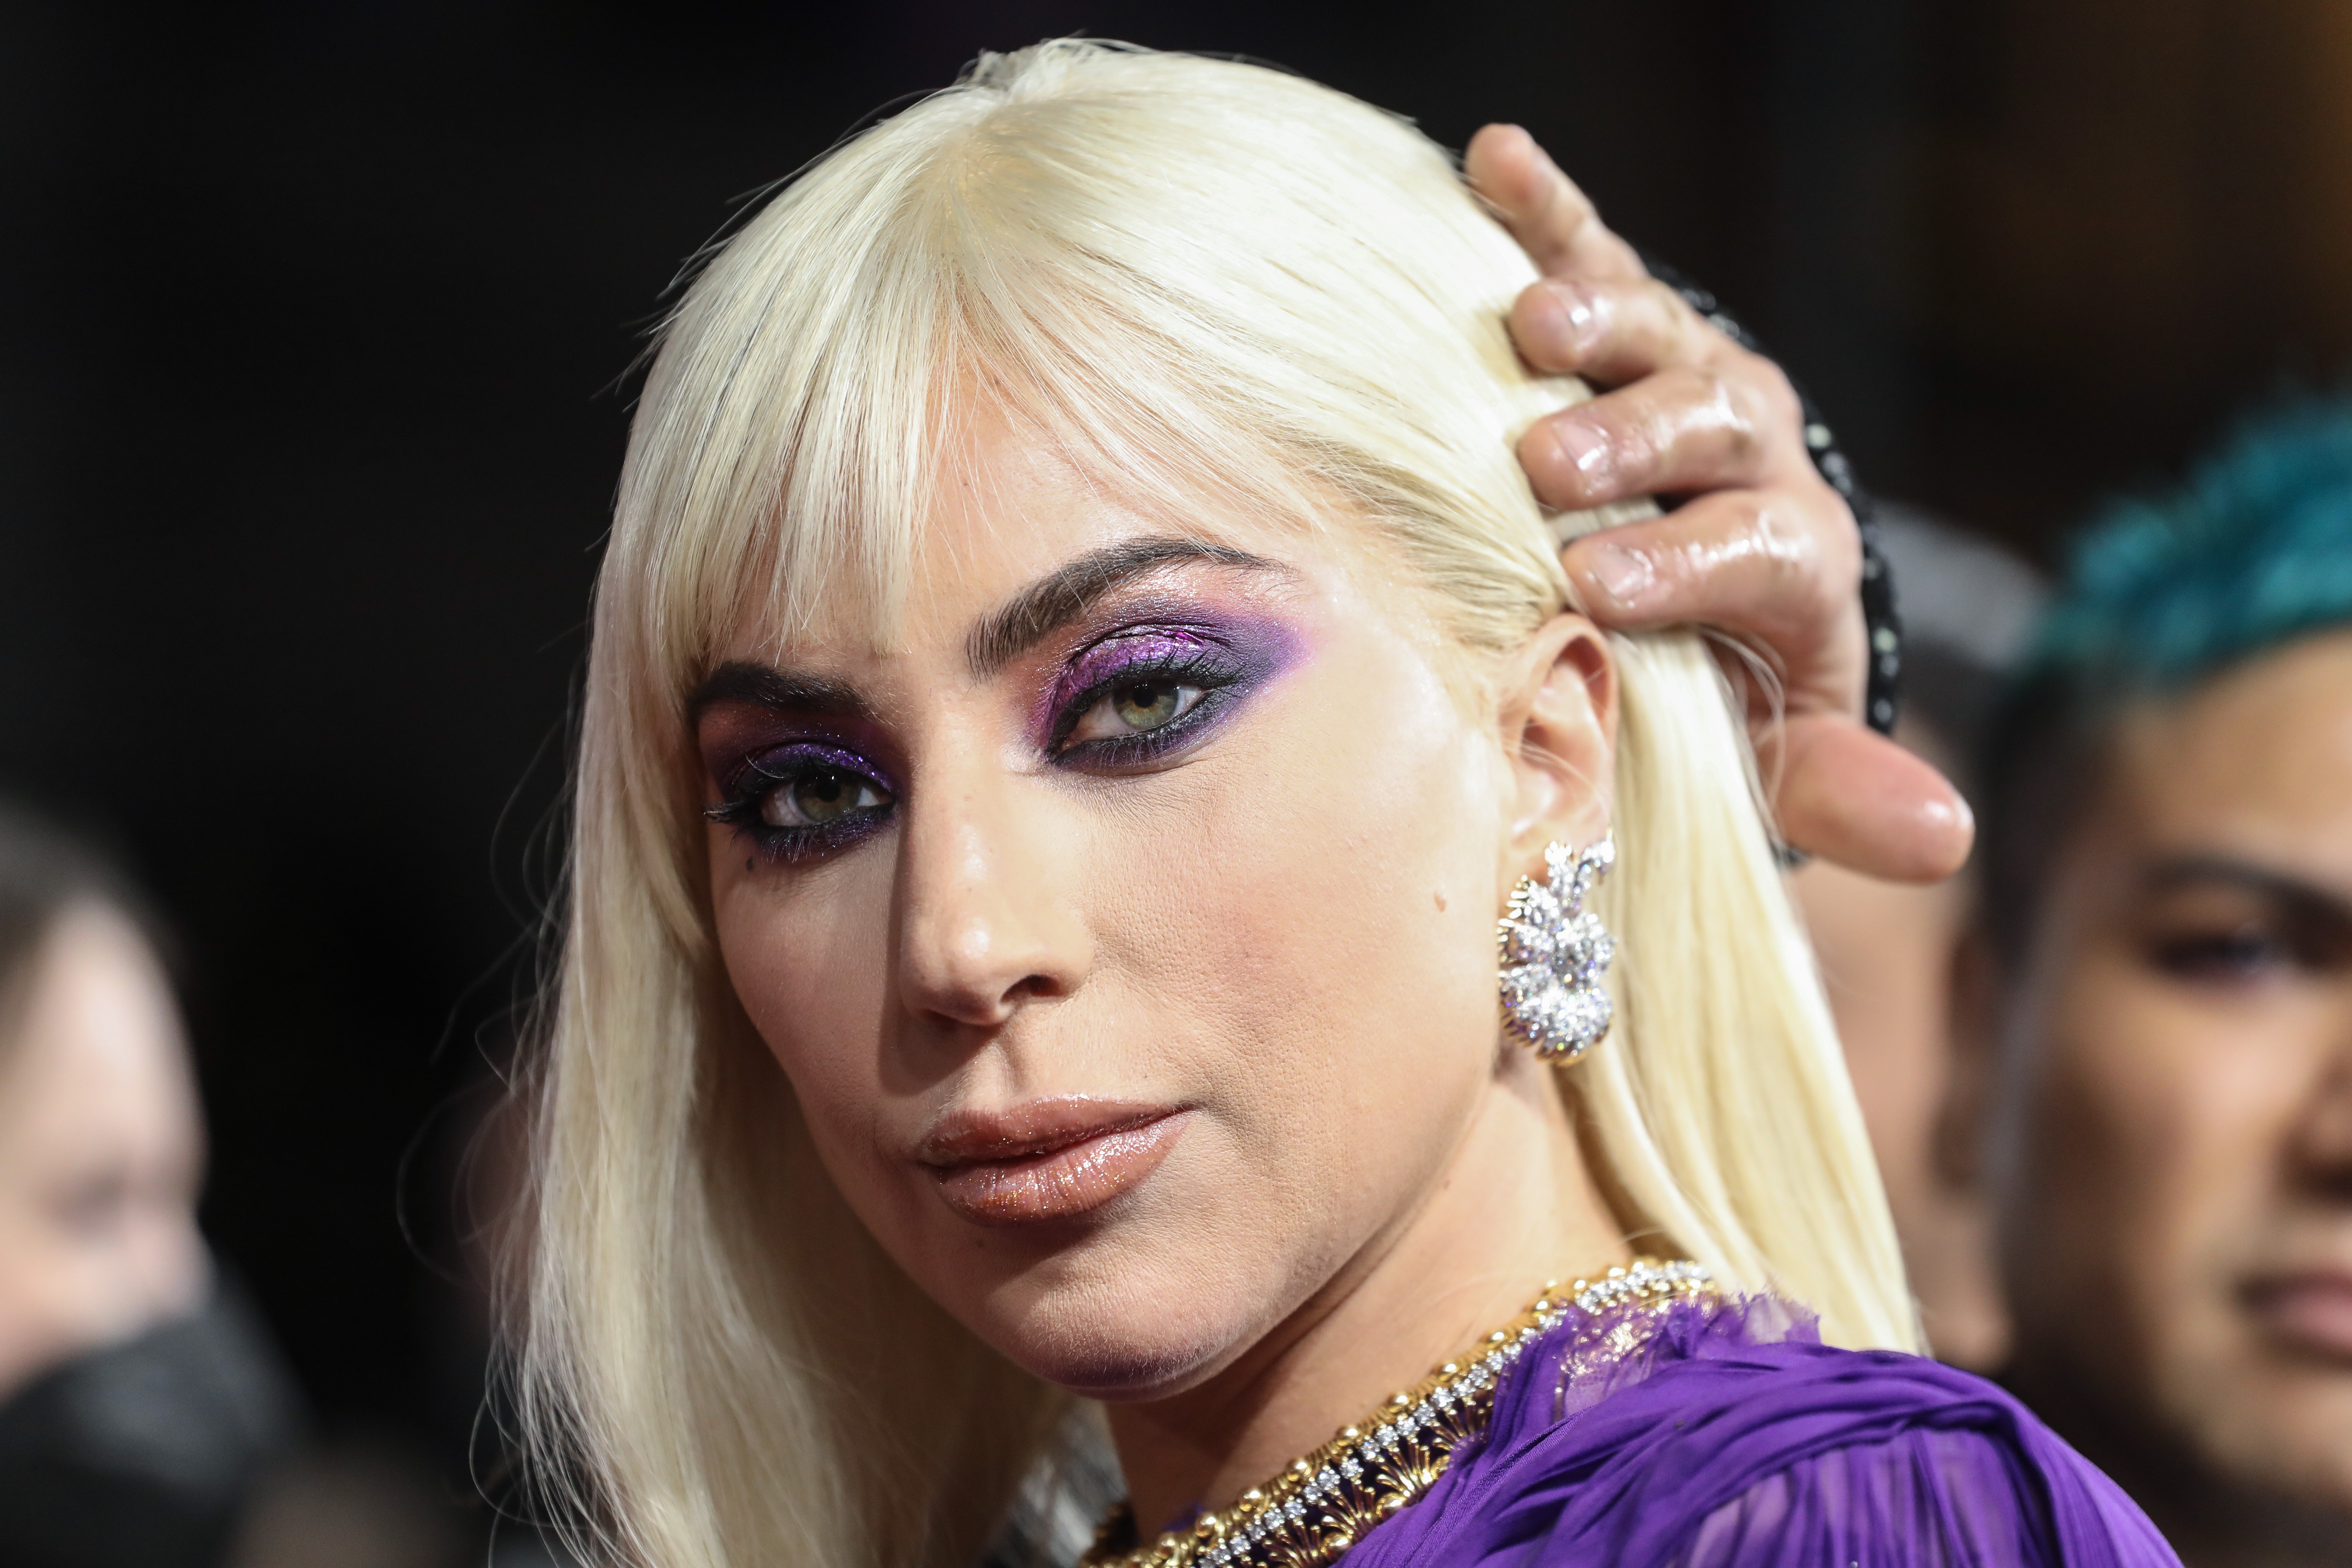 London, England - November 9: Lady Gaga attended the UK premiere "Gucci House" At Odeon Luxe Leicester Square on November 09, 2021 in London, England.  (Photo by Leah Toby/Getty Images) (Photo: Getty Images)